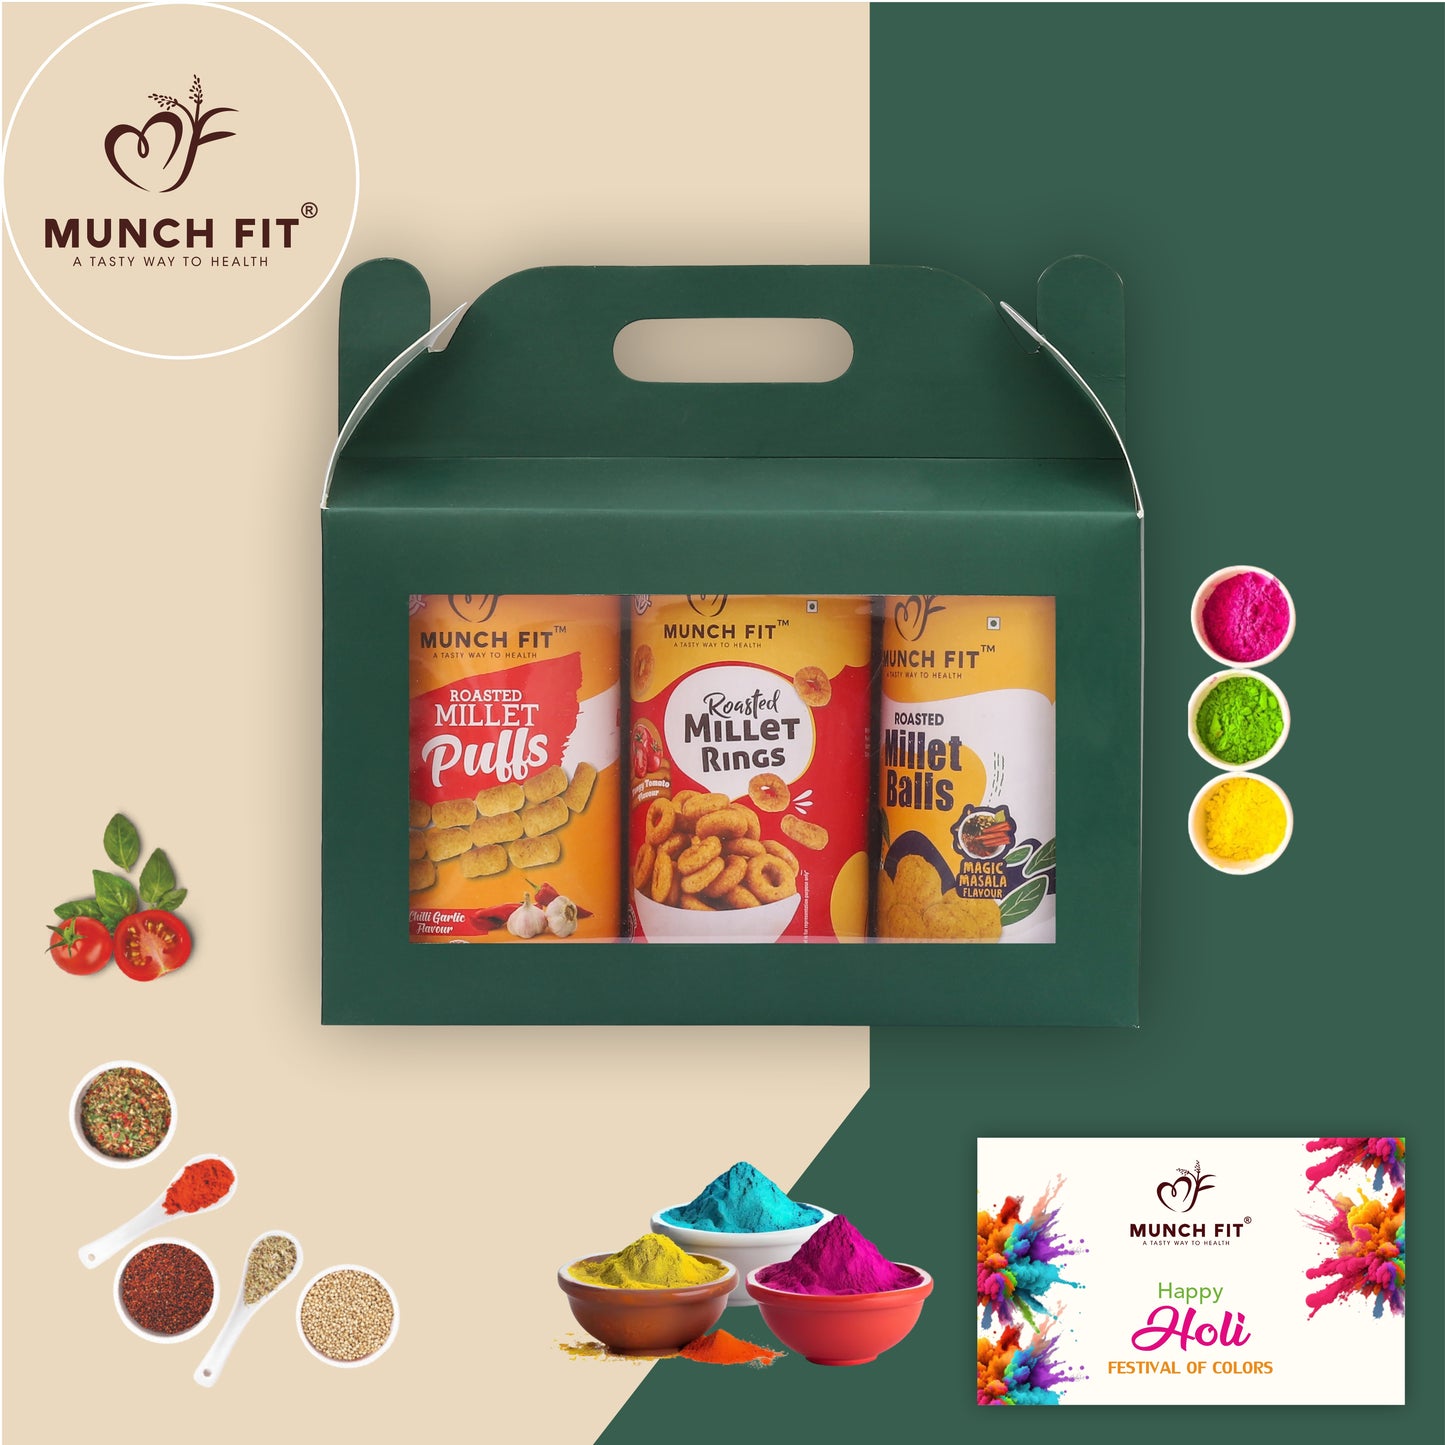 
                  
                    Munchfit Healthy Holi Gift Pack with Gulal & Card | Combo of 3 Varieties of Tasty, Healthy Snacks & Puffs | Perfect Holi Gift Hamper for Family & Friends | Pack of 1x25g each
                  
                